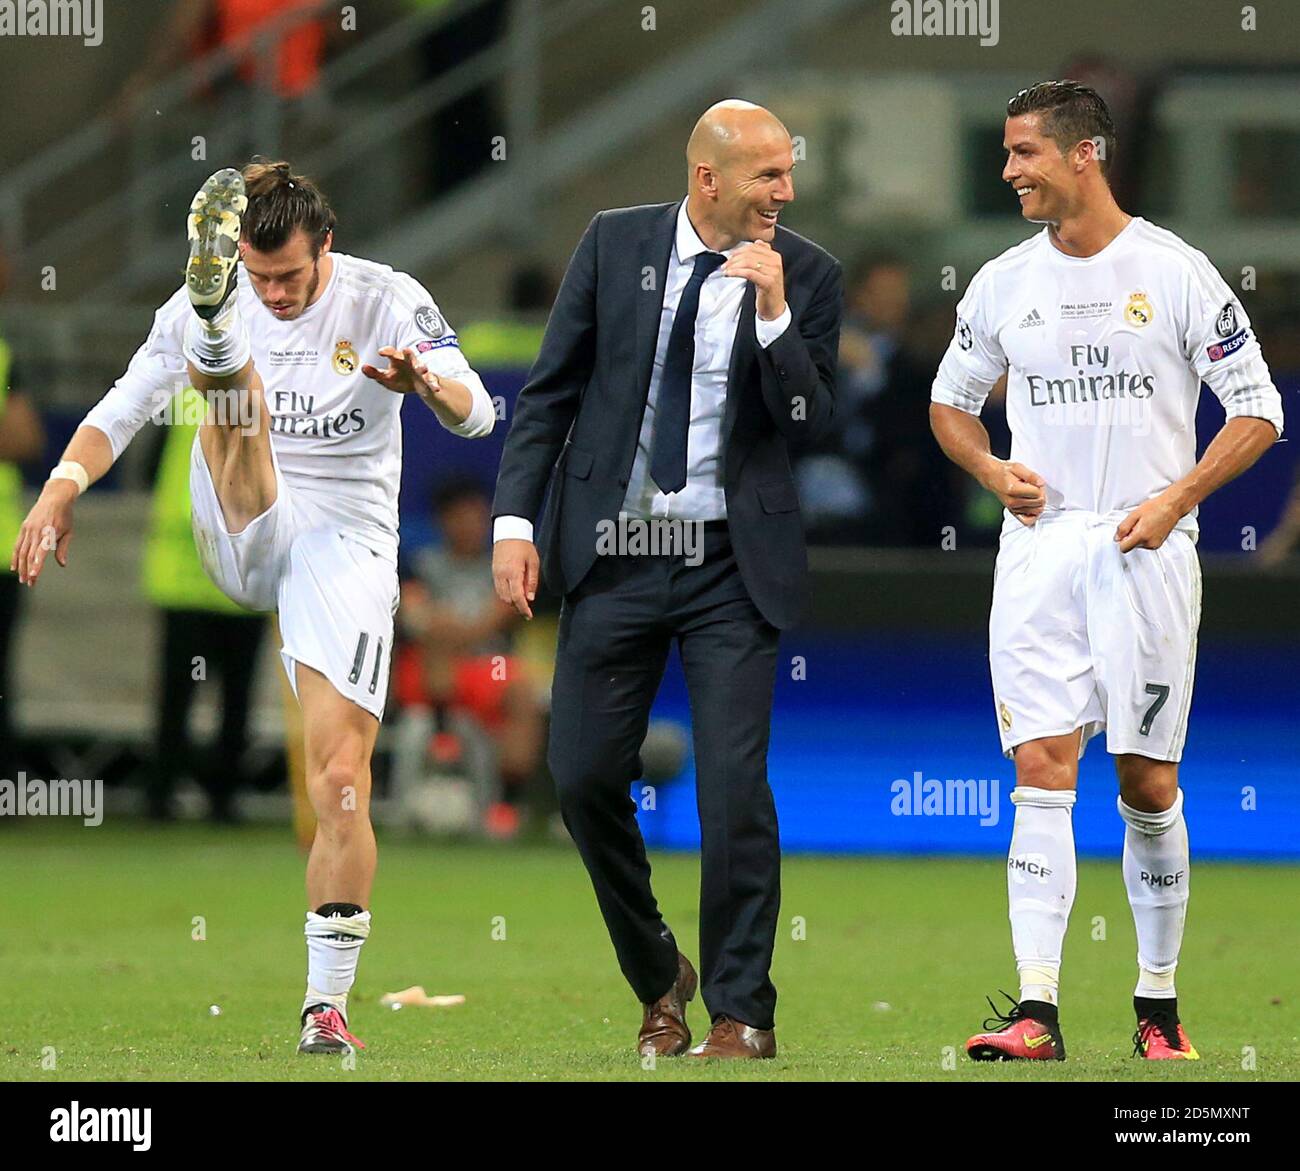 Real Madrid's Gareth Bale and Cristiano Ronaldo (right) with manager  Zinedine Zidane (centre) during half-time in extra-time Stock Photo - Alamy